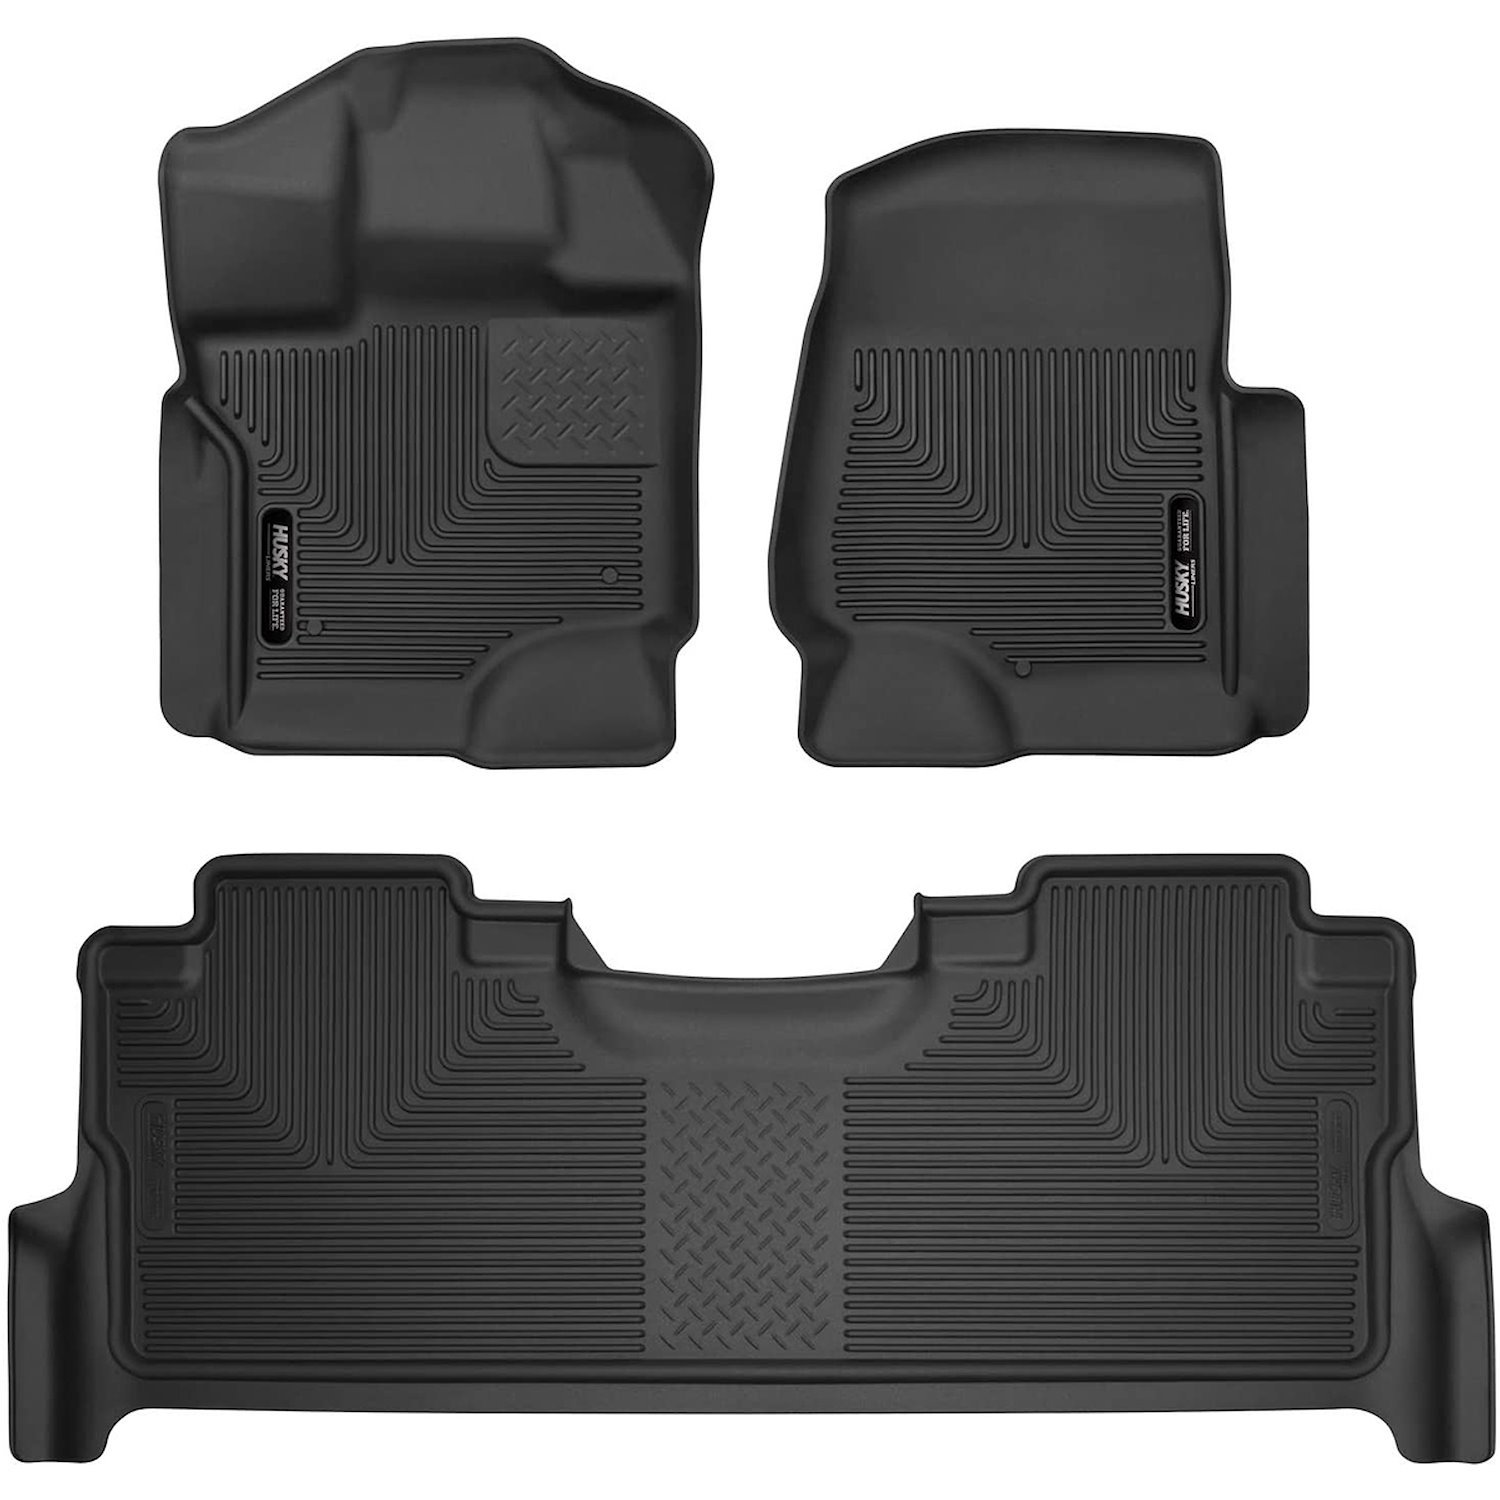 X-Act Contour Floor Liners for Ford F-250/F-350/F-450 Super Duty Crew Cab